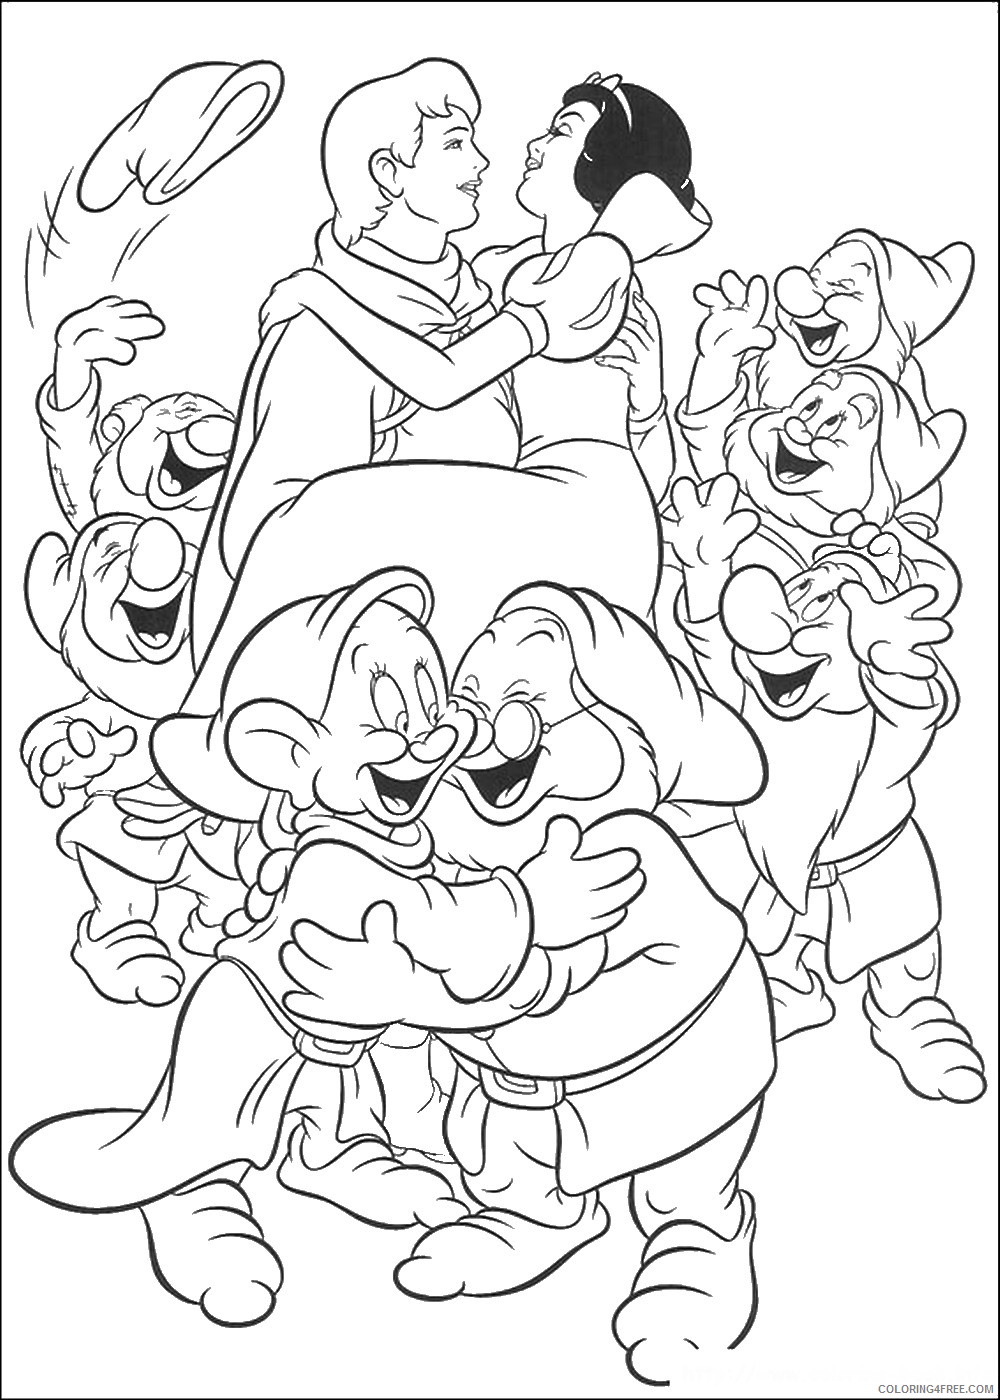 Snow White Coloring Pages Cartoons snow_white_cl_73 Printable 2020 5748 Coloring4free